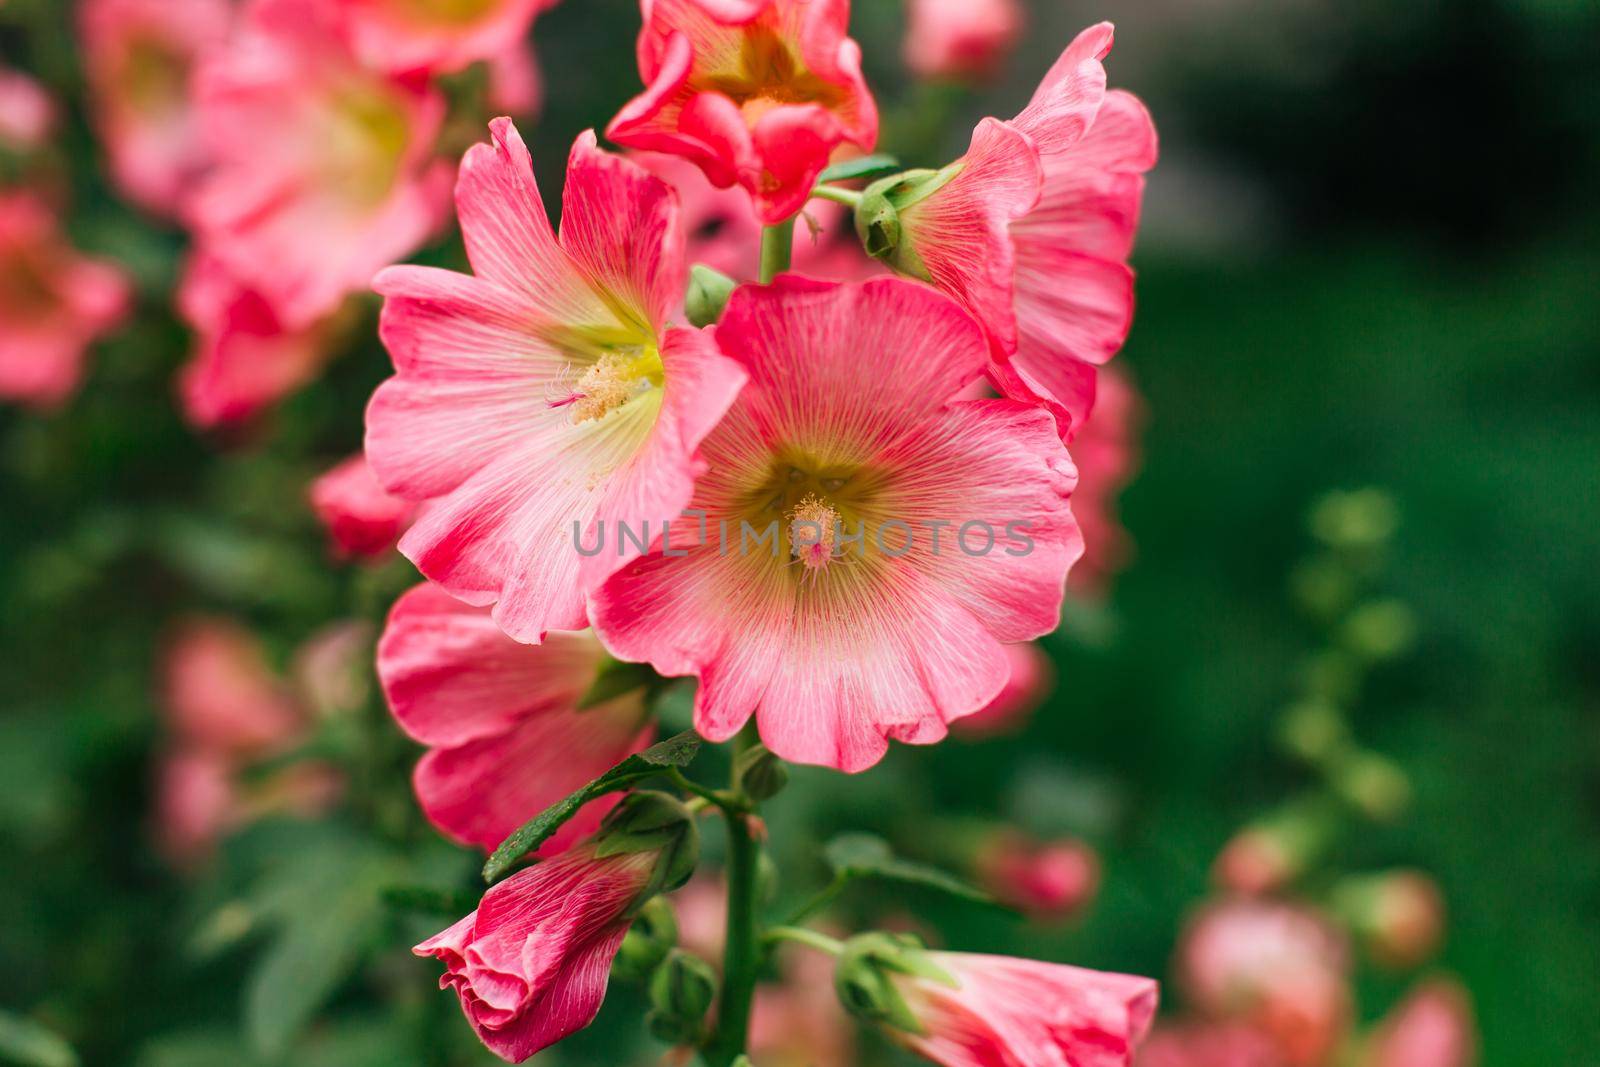 Pink mallow flowers with drops of dew on the petals in a garden